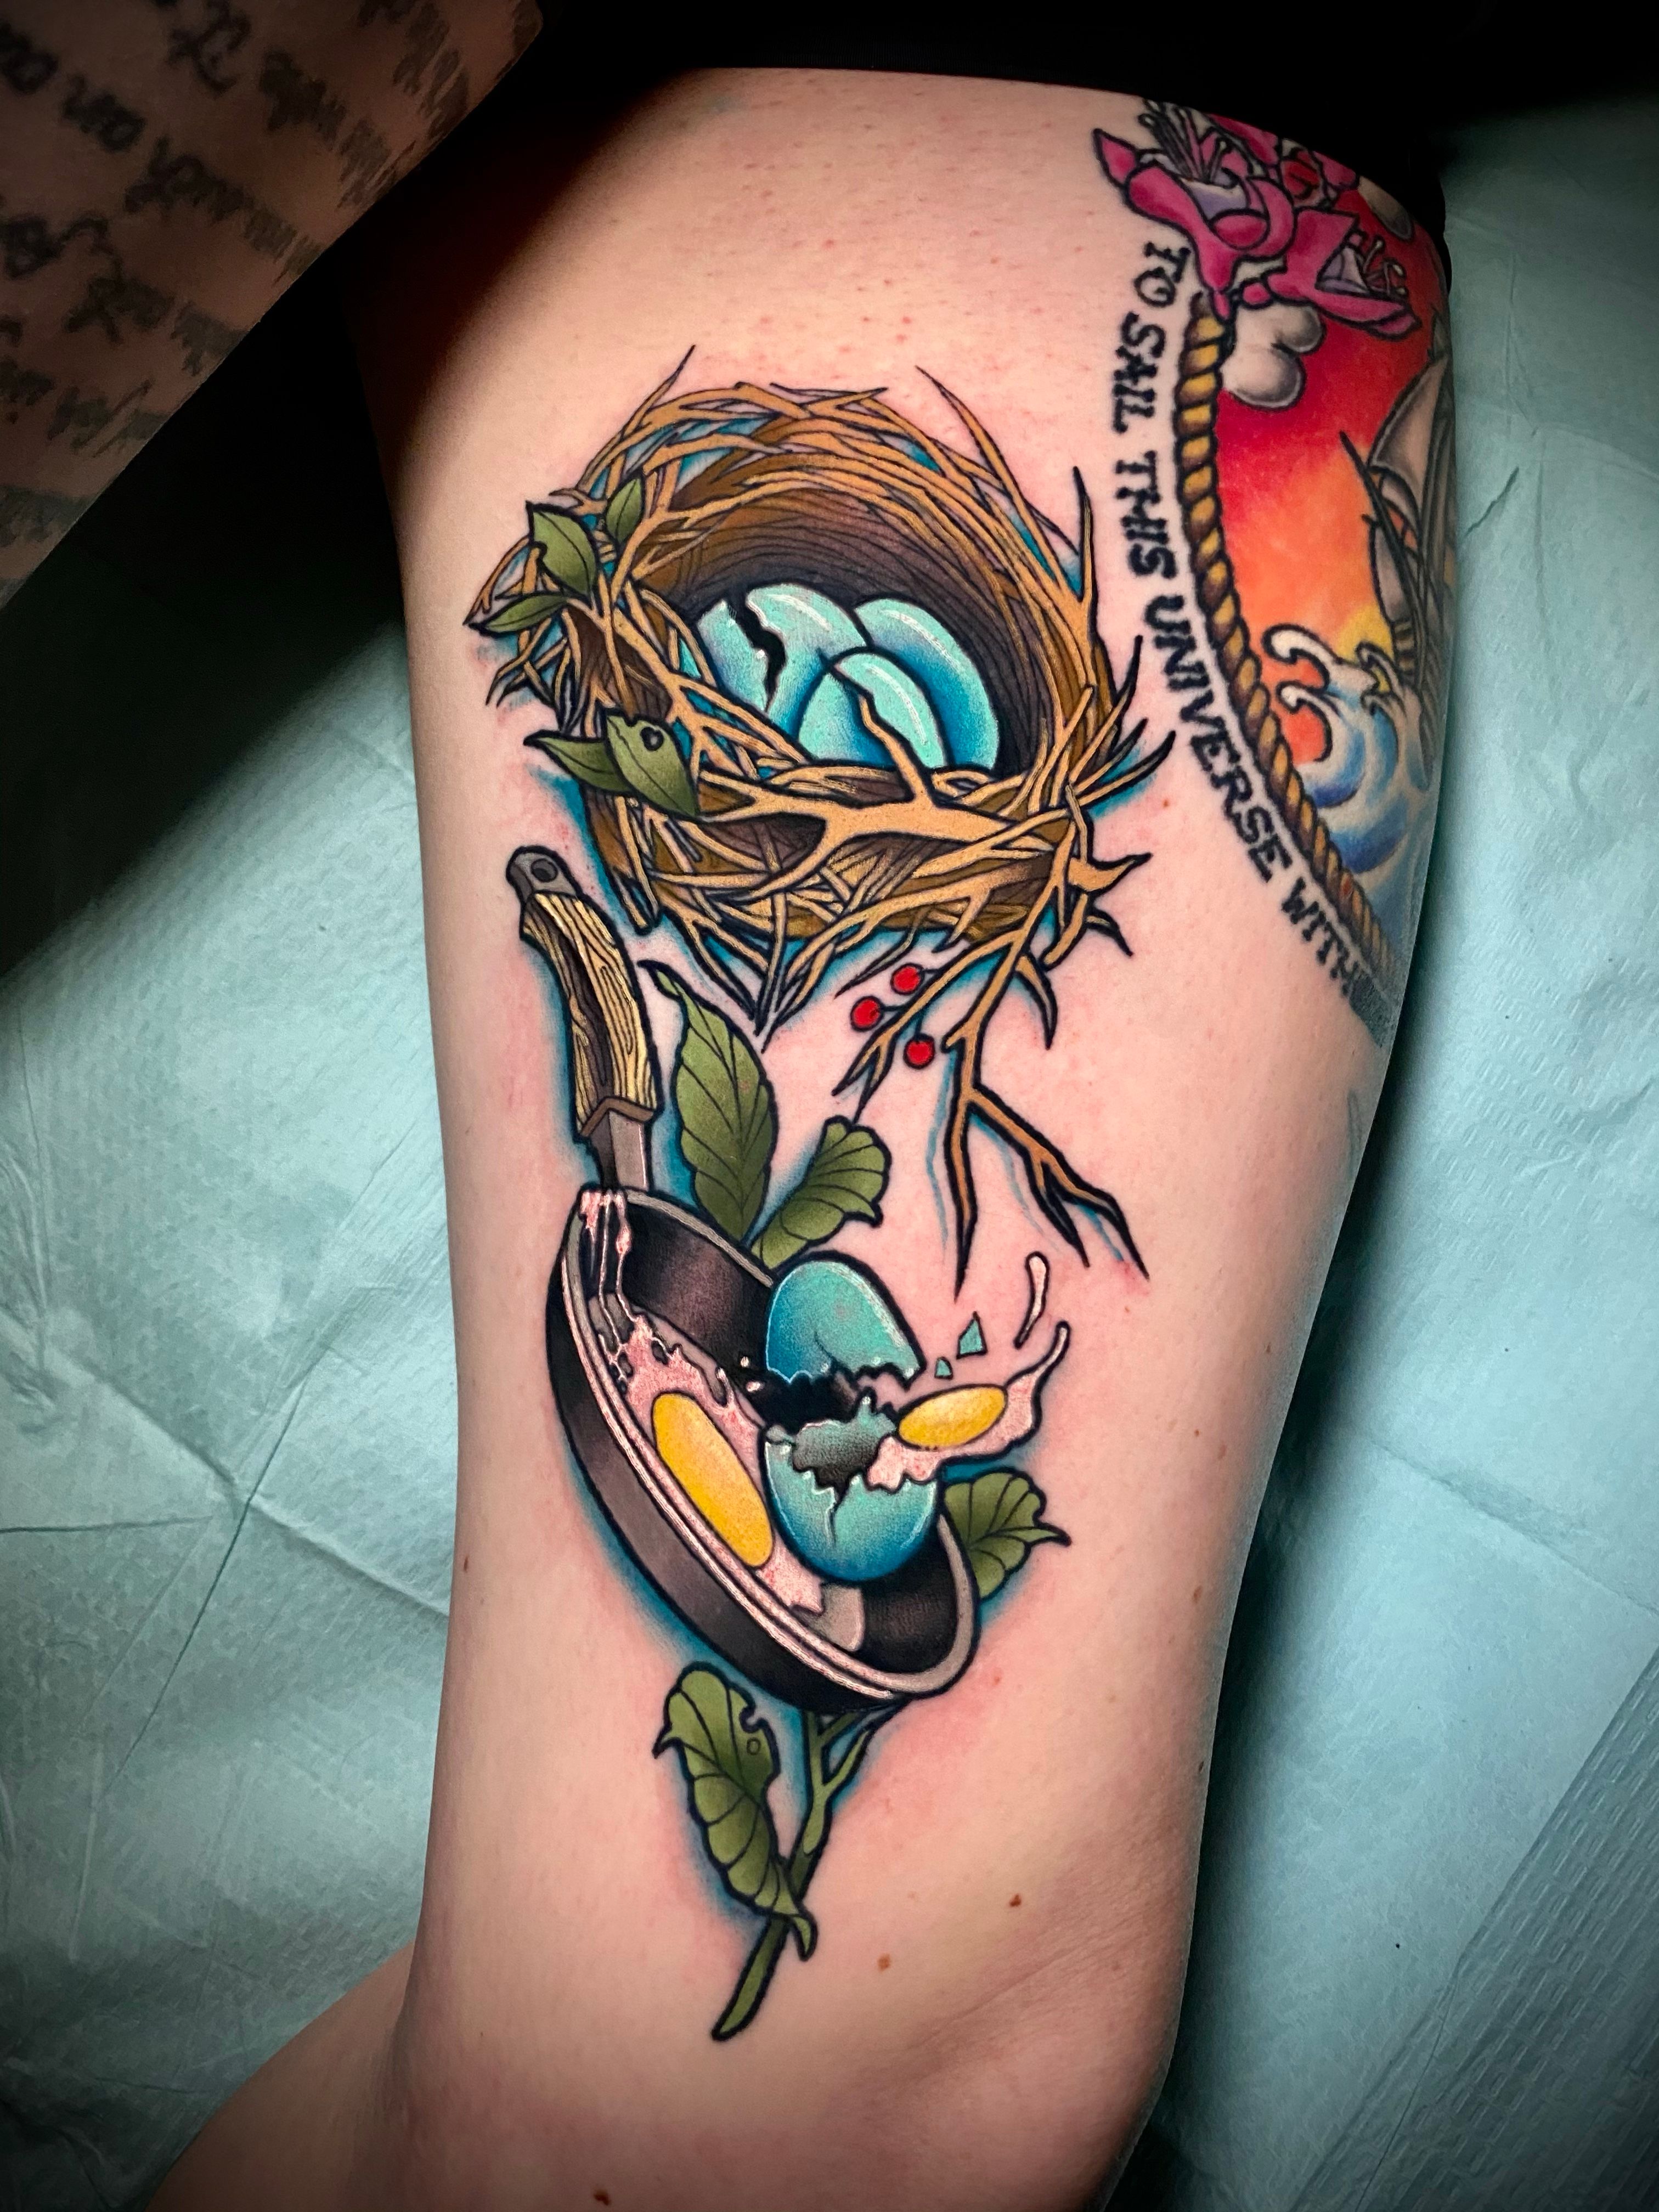 Birds nest tattoo. My brand new tattoo which represent my kids I will feed  all my life long!